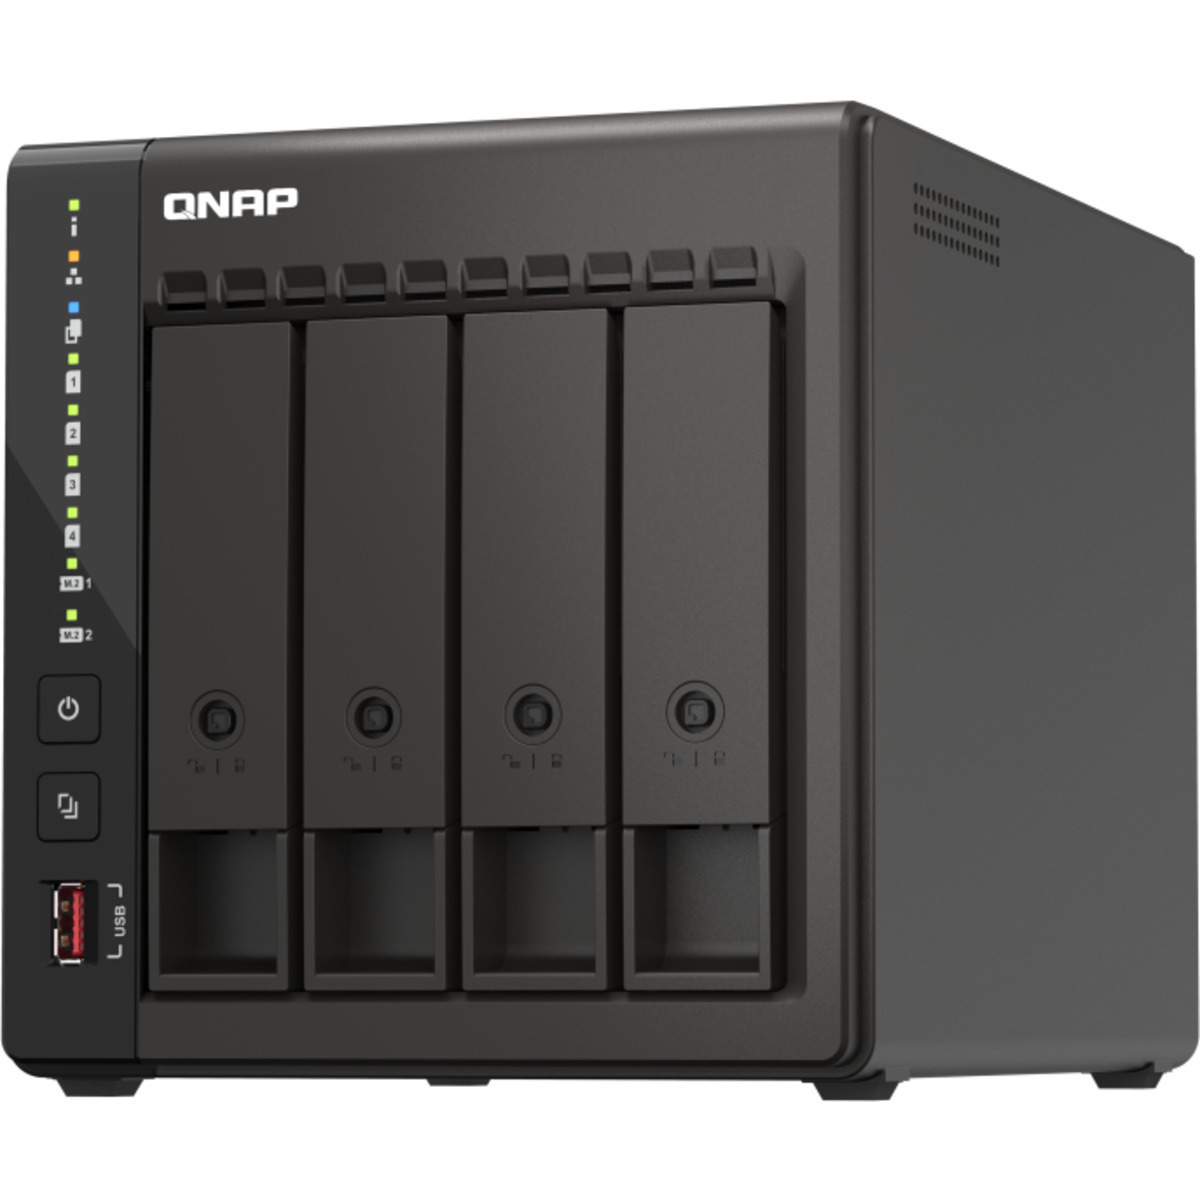 buy QNAP TS-453E 16tb Desktop NAS - Network Attached Storage Device 4x4000gb Seagate BarraCuda ST4000DM004 3.5 7200rpm SATA 6Gb/s HDD CONSUMER Class Drives Installed - Burn-In Tested - nas headquarters buy network attached storage server device das new raid-5 free shipping usa spring sale TS-453E